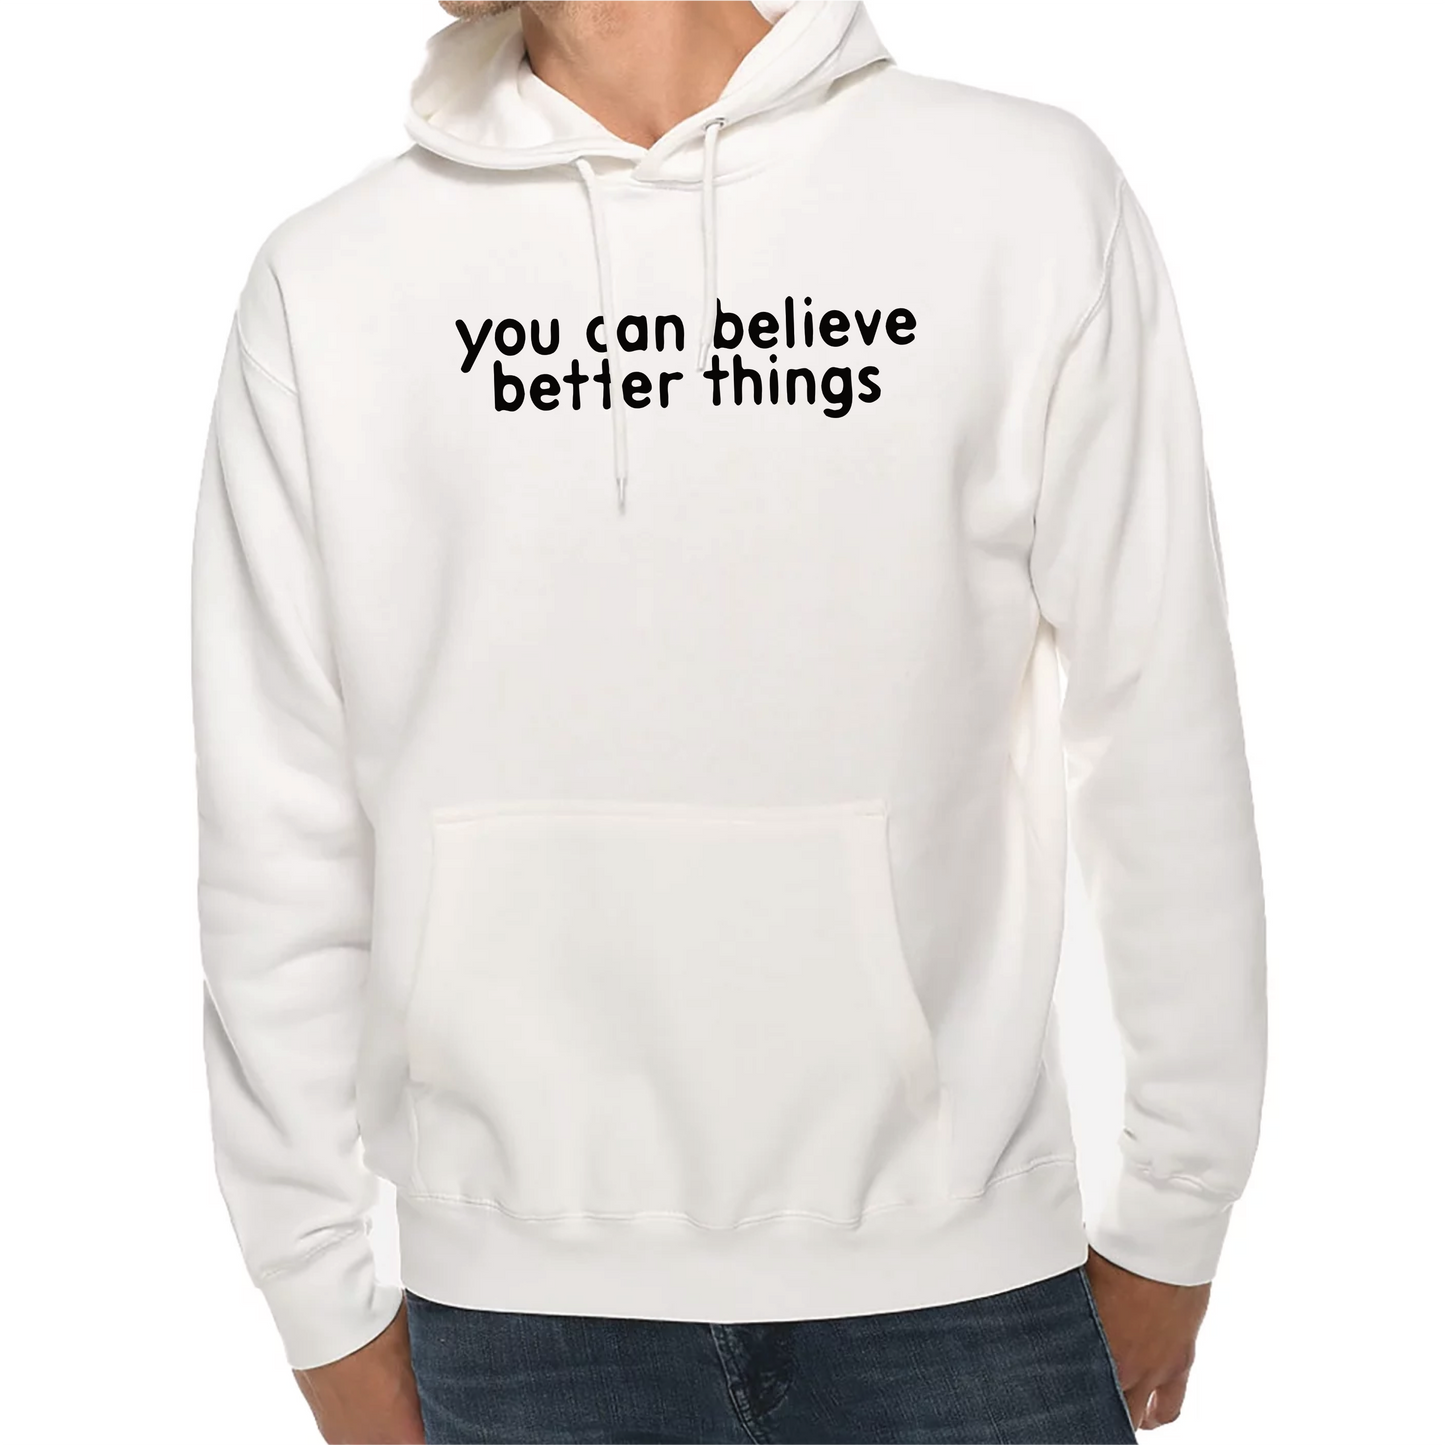 YOU CAN BELIEVE BETTER (PRINTED) THINGS